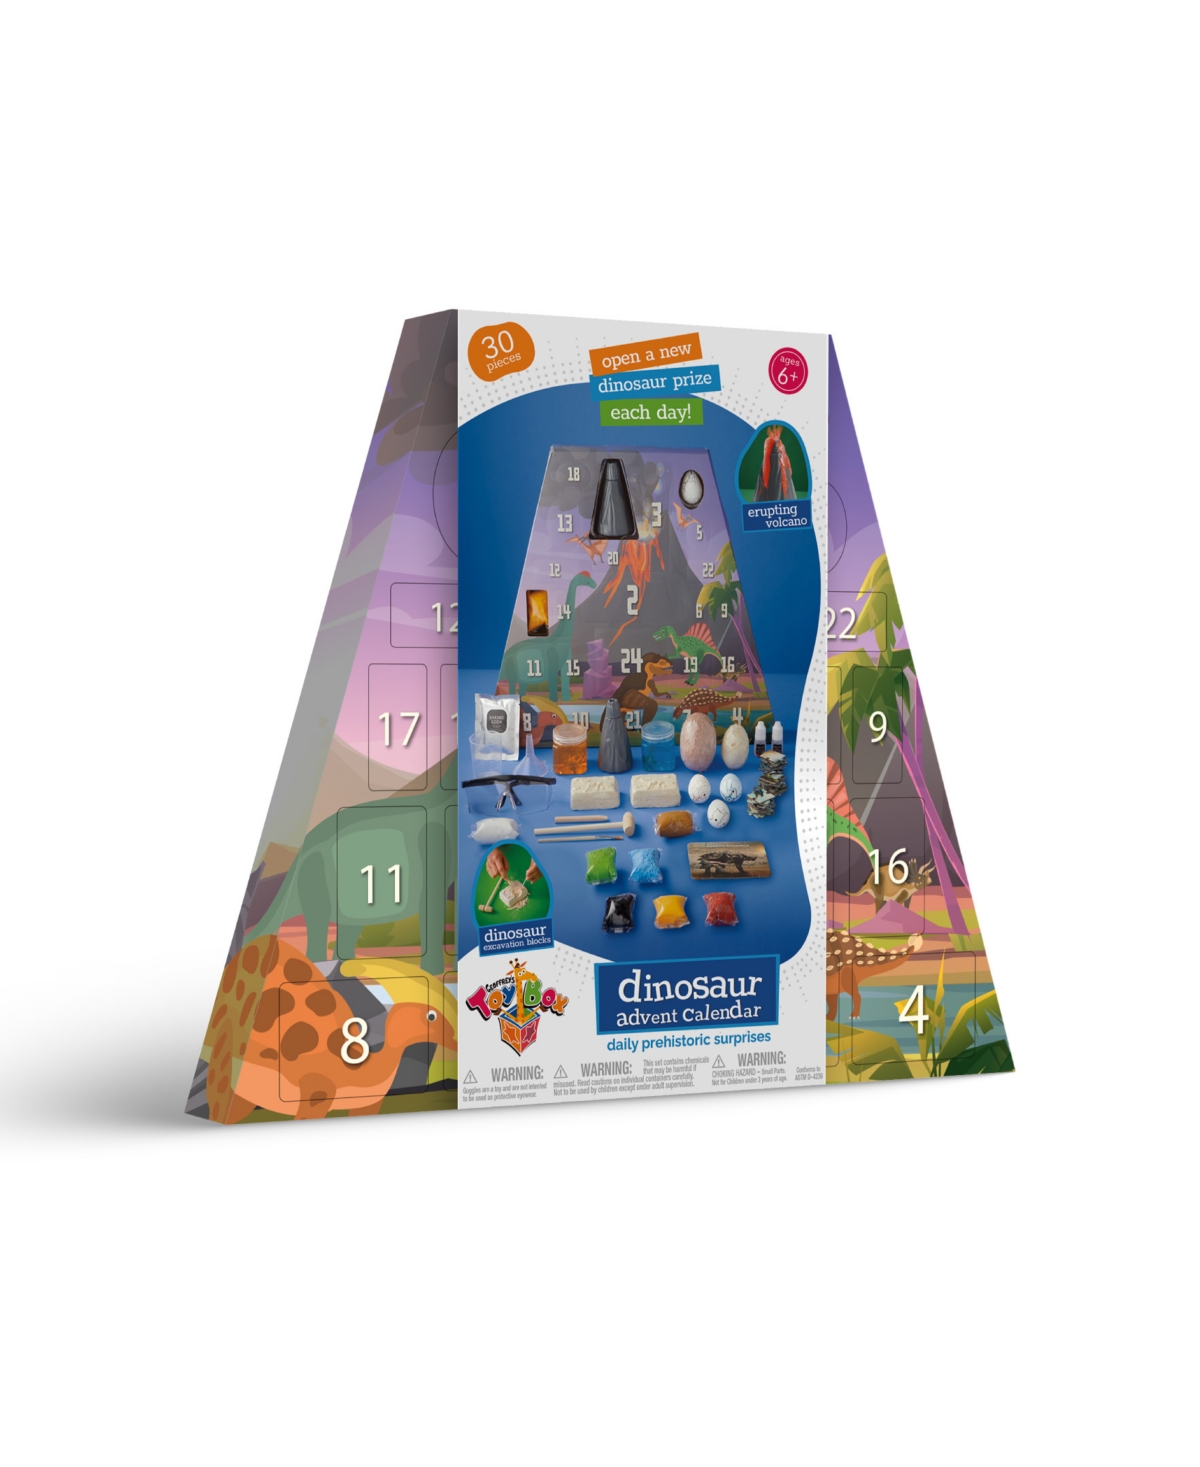 Shop Geoffrey's Toy Box Closeout!  Dinosaur Advent Calendar, Dinosaurs Themed Holiday Presents For Advent  In Open Miscellaneous